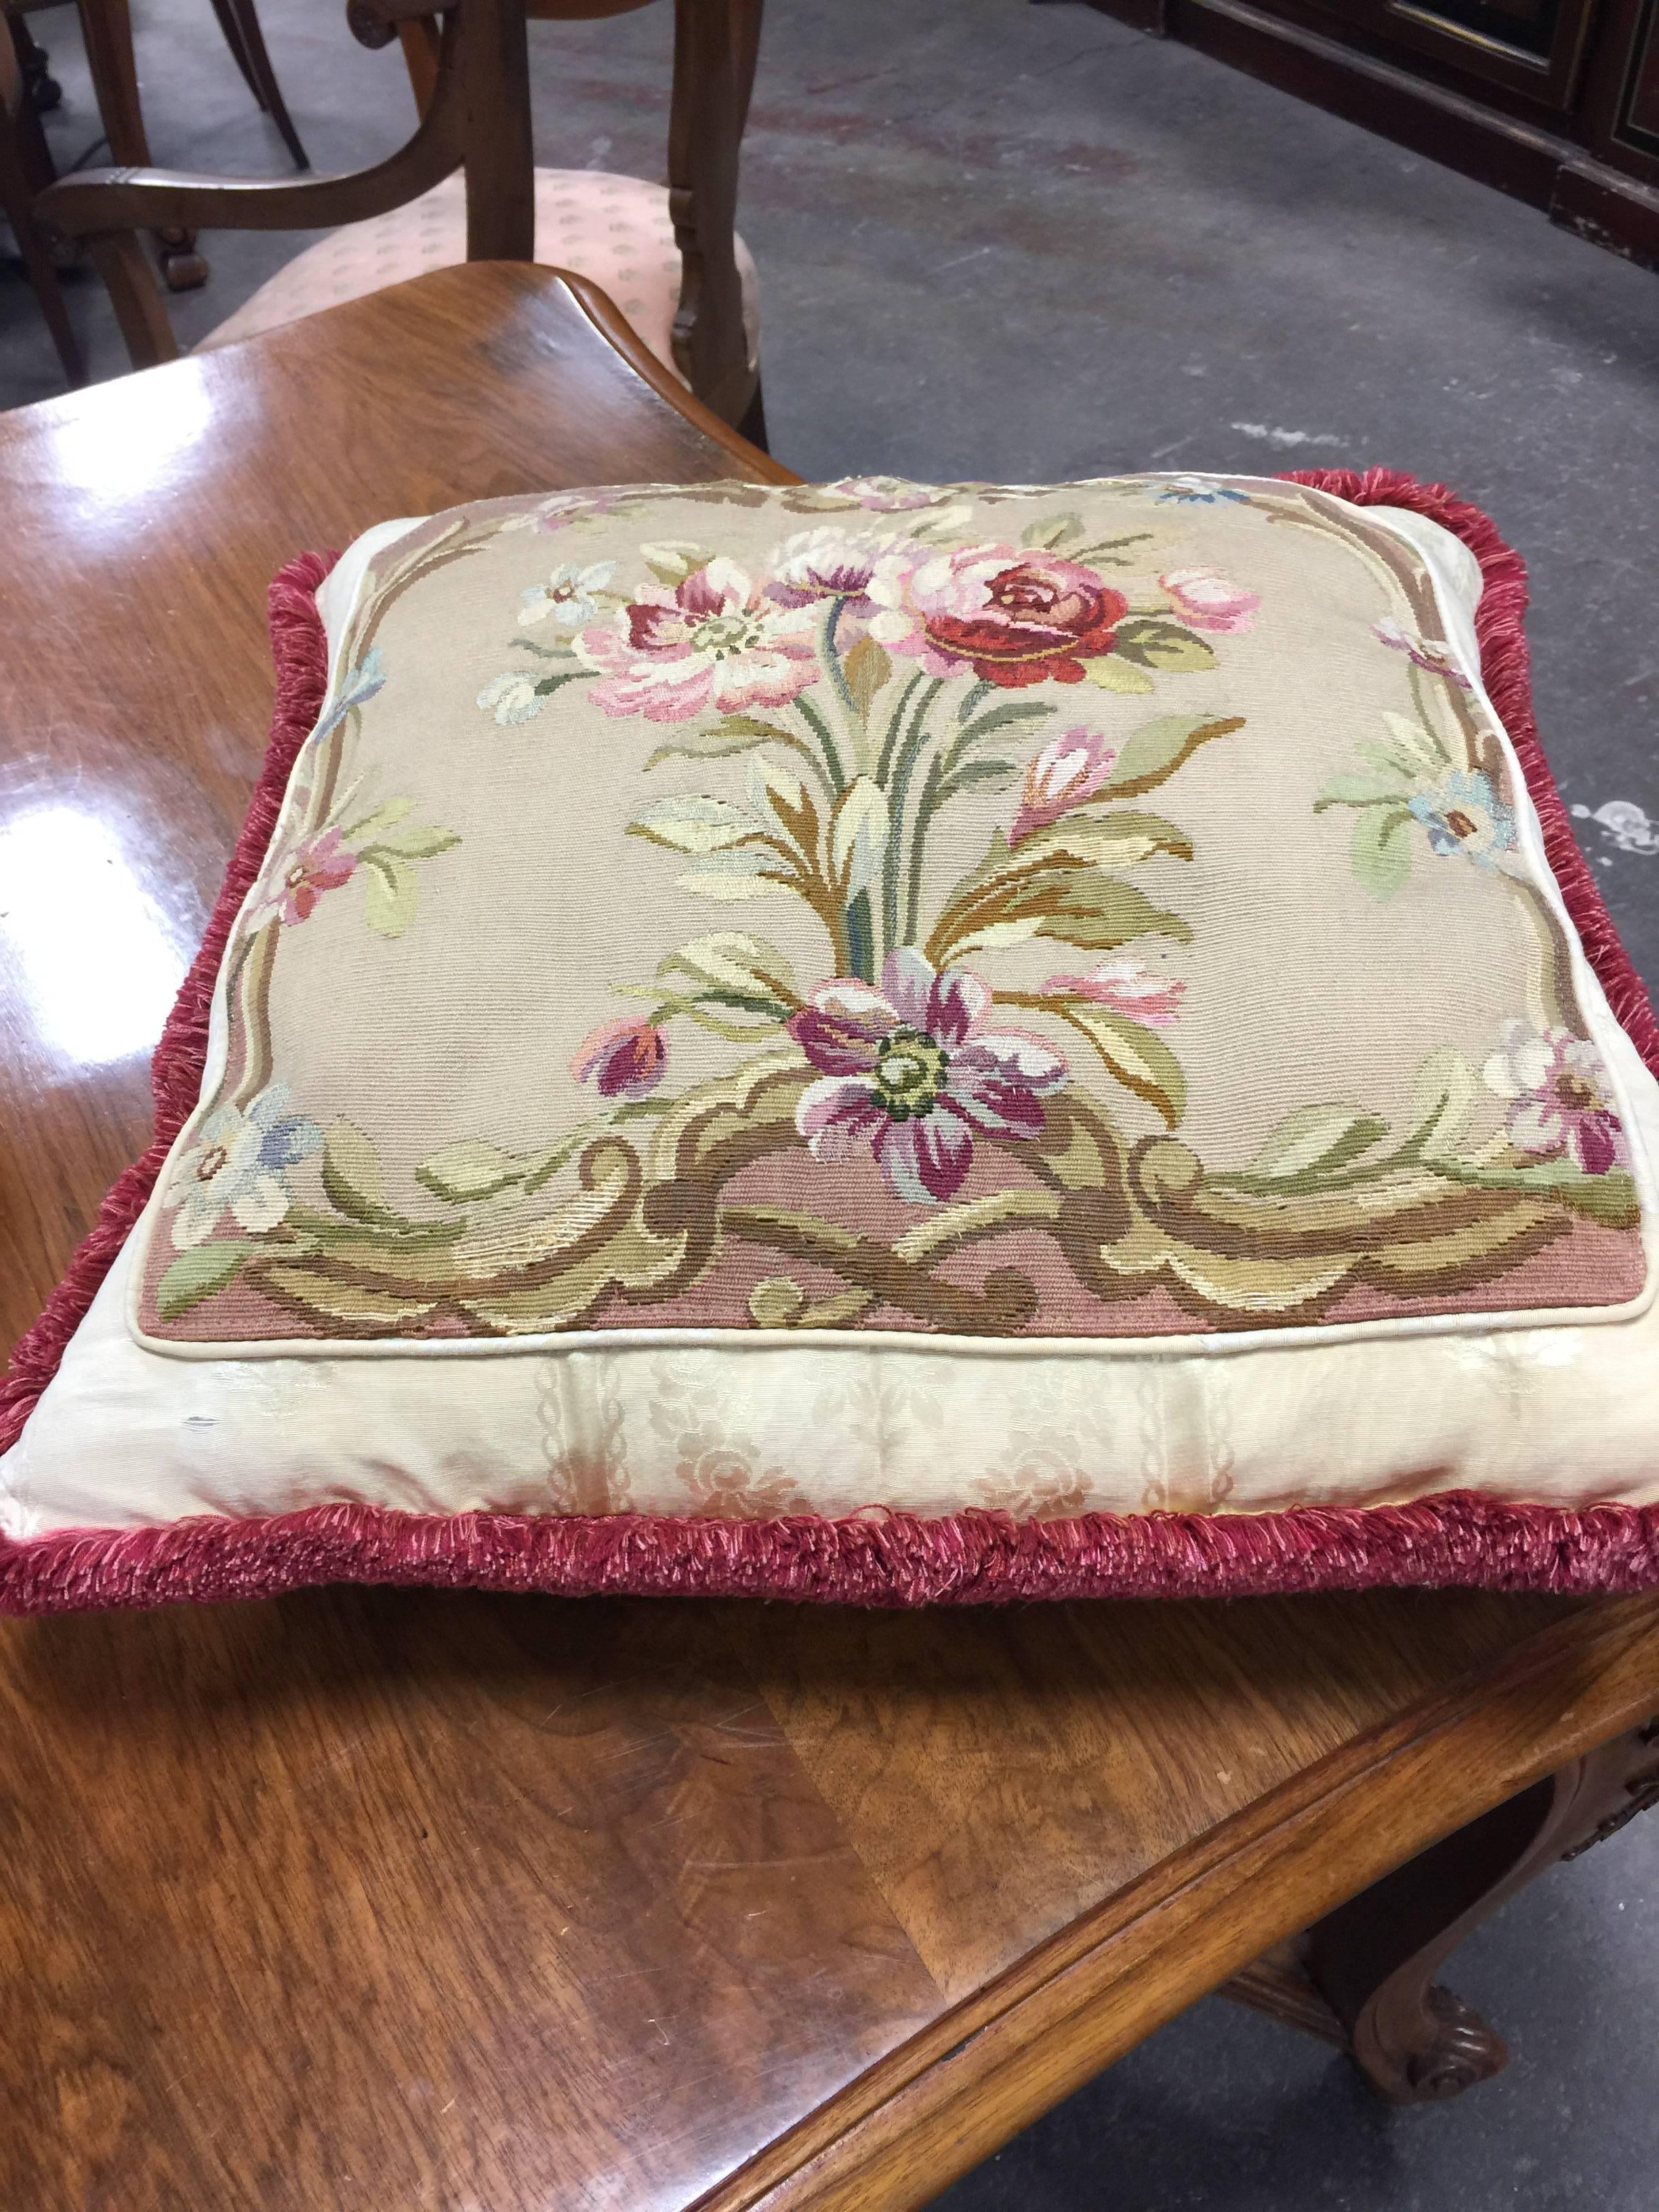 19th century French tapestry made into pillow.
Vintage silk fabric.
Left hand corner in back the silk is deteriorated.
Image 4 shows some deterioration in the tapestry.